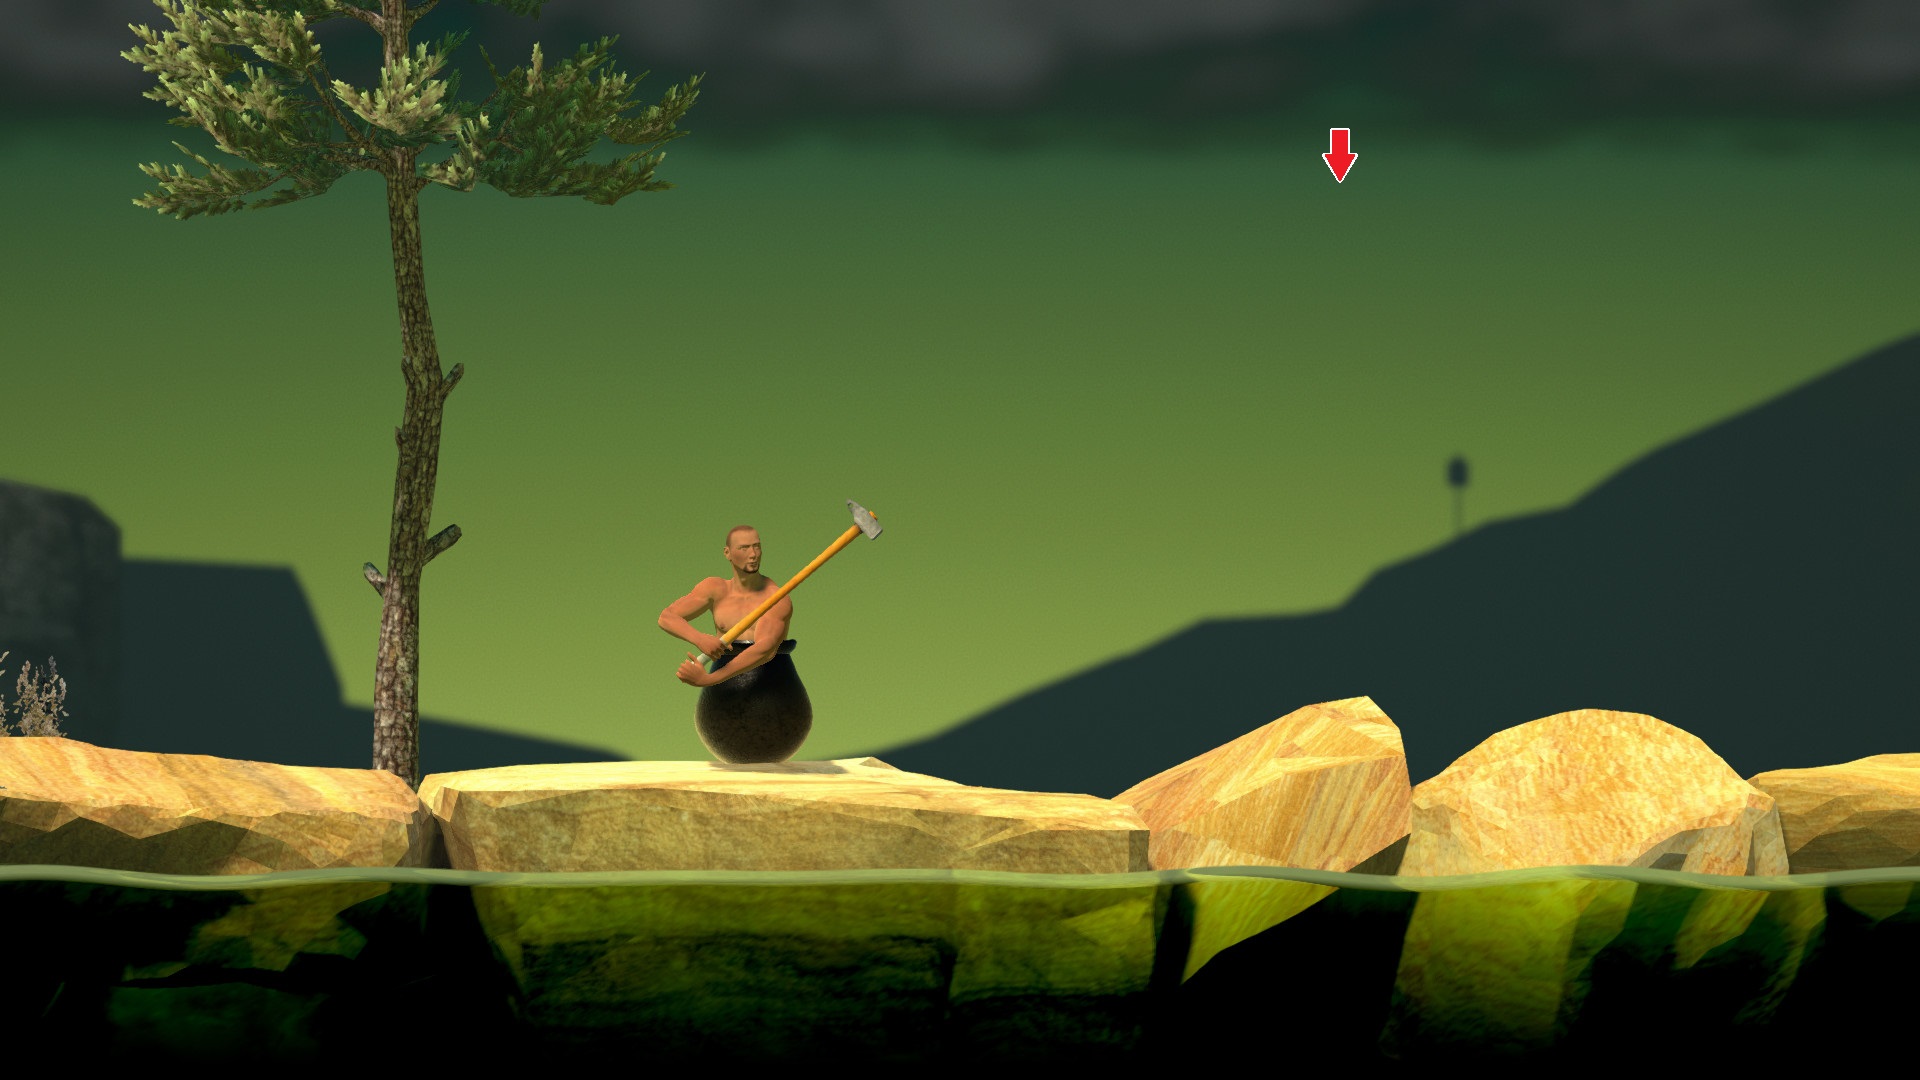 Getting Over It Speedrun World Record in 1:00.152 